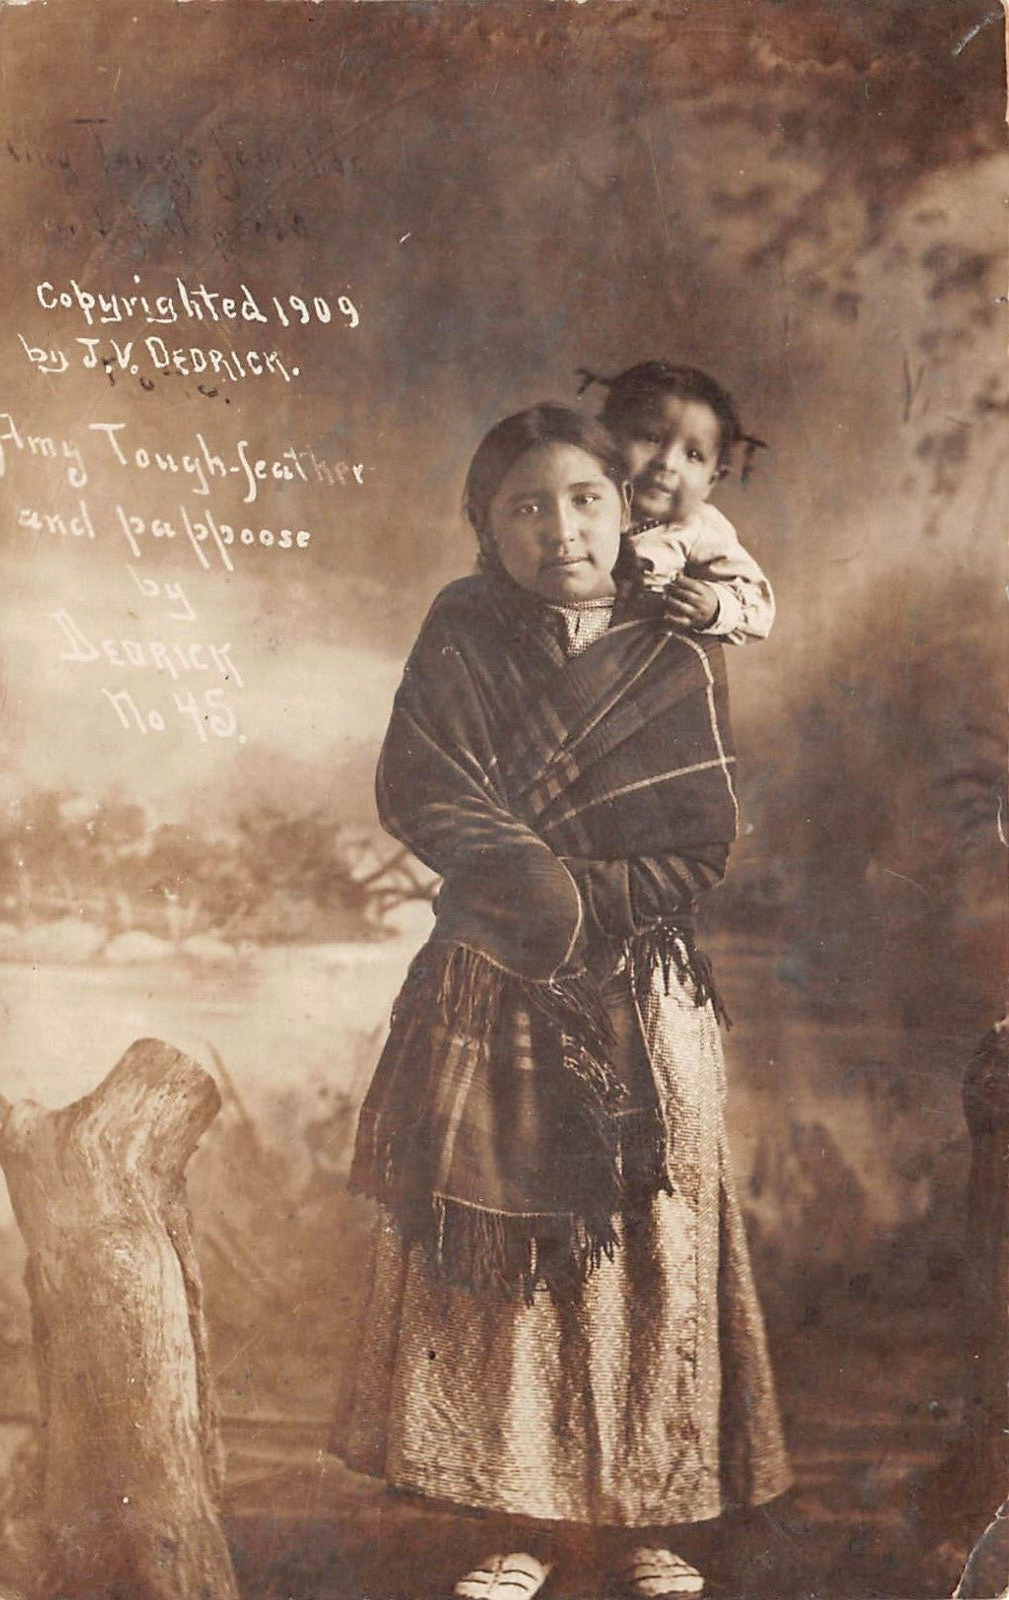 RPPC Native American Amy Tough-Feather & Papoose by Dedrick 1909 Photo 9453